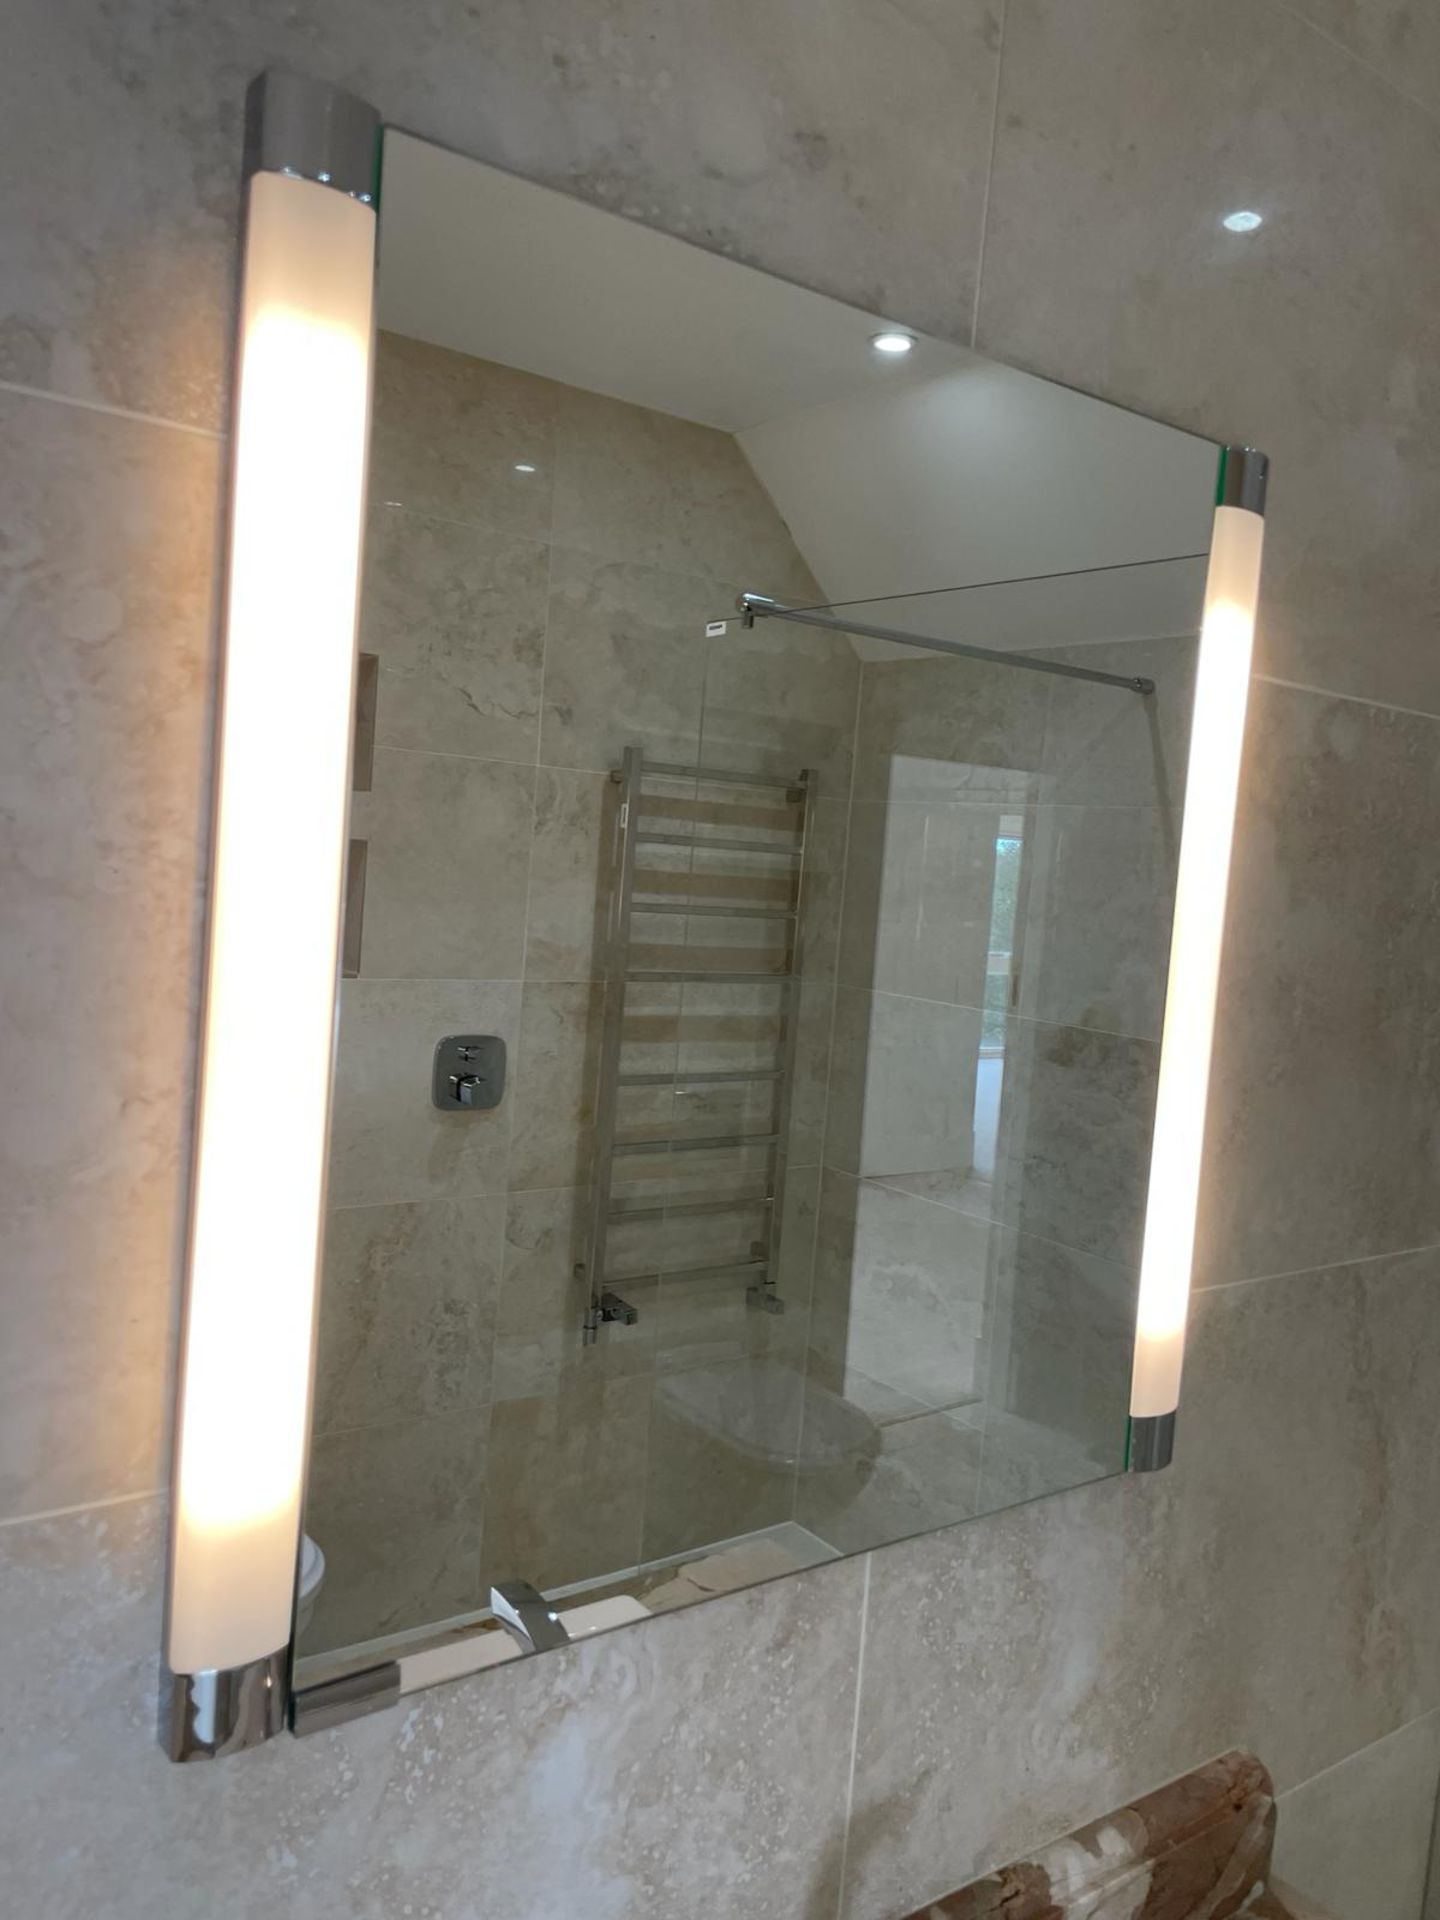 2 x KEUCO Illuminated Mirrored Wall Mounted Cabinets - Total Original Value: £2,000 - Ref: - Image 5 of 19